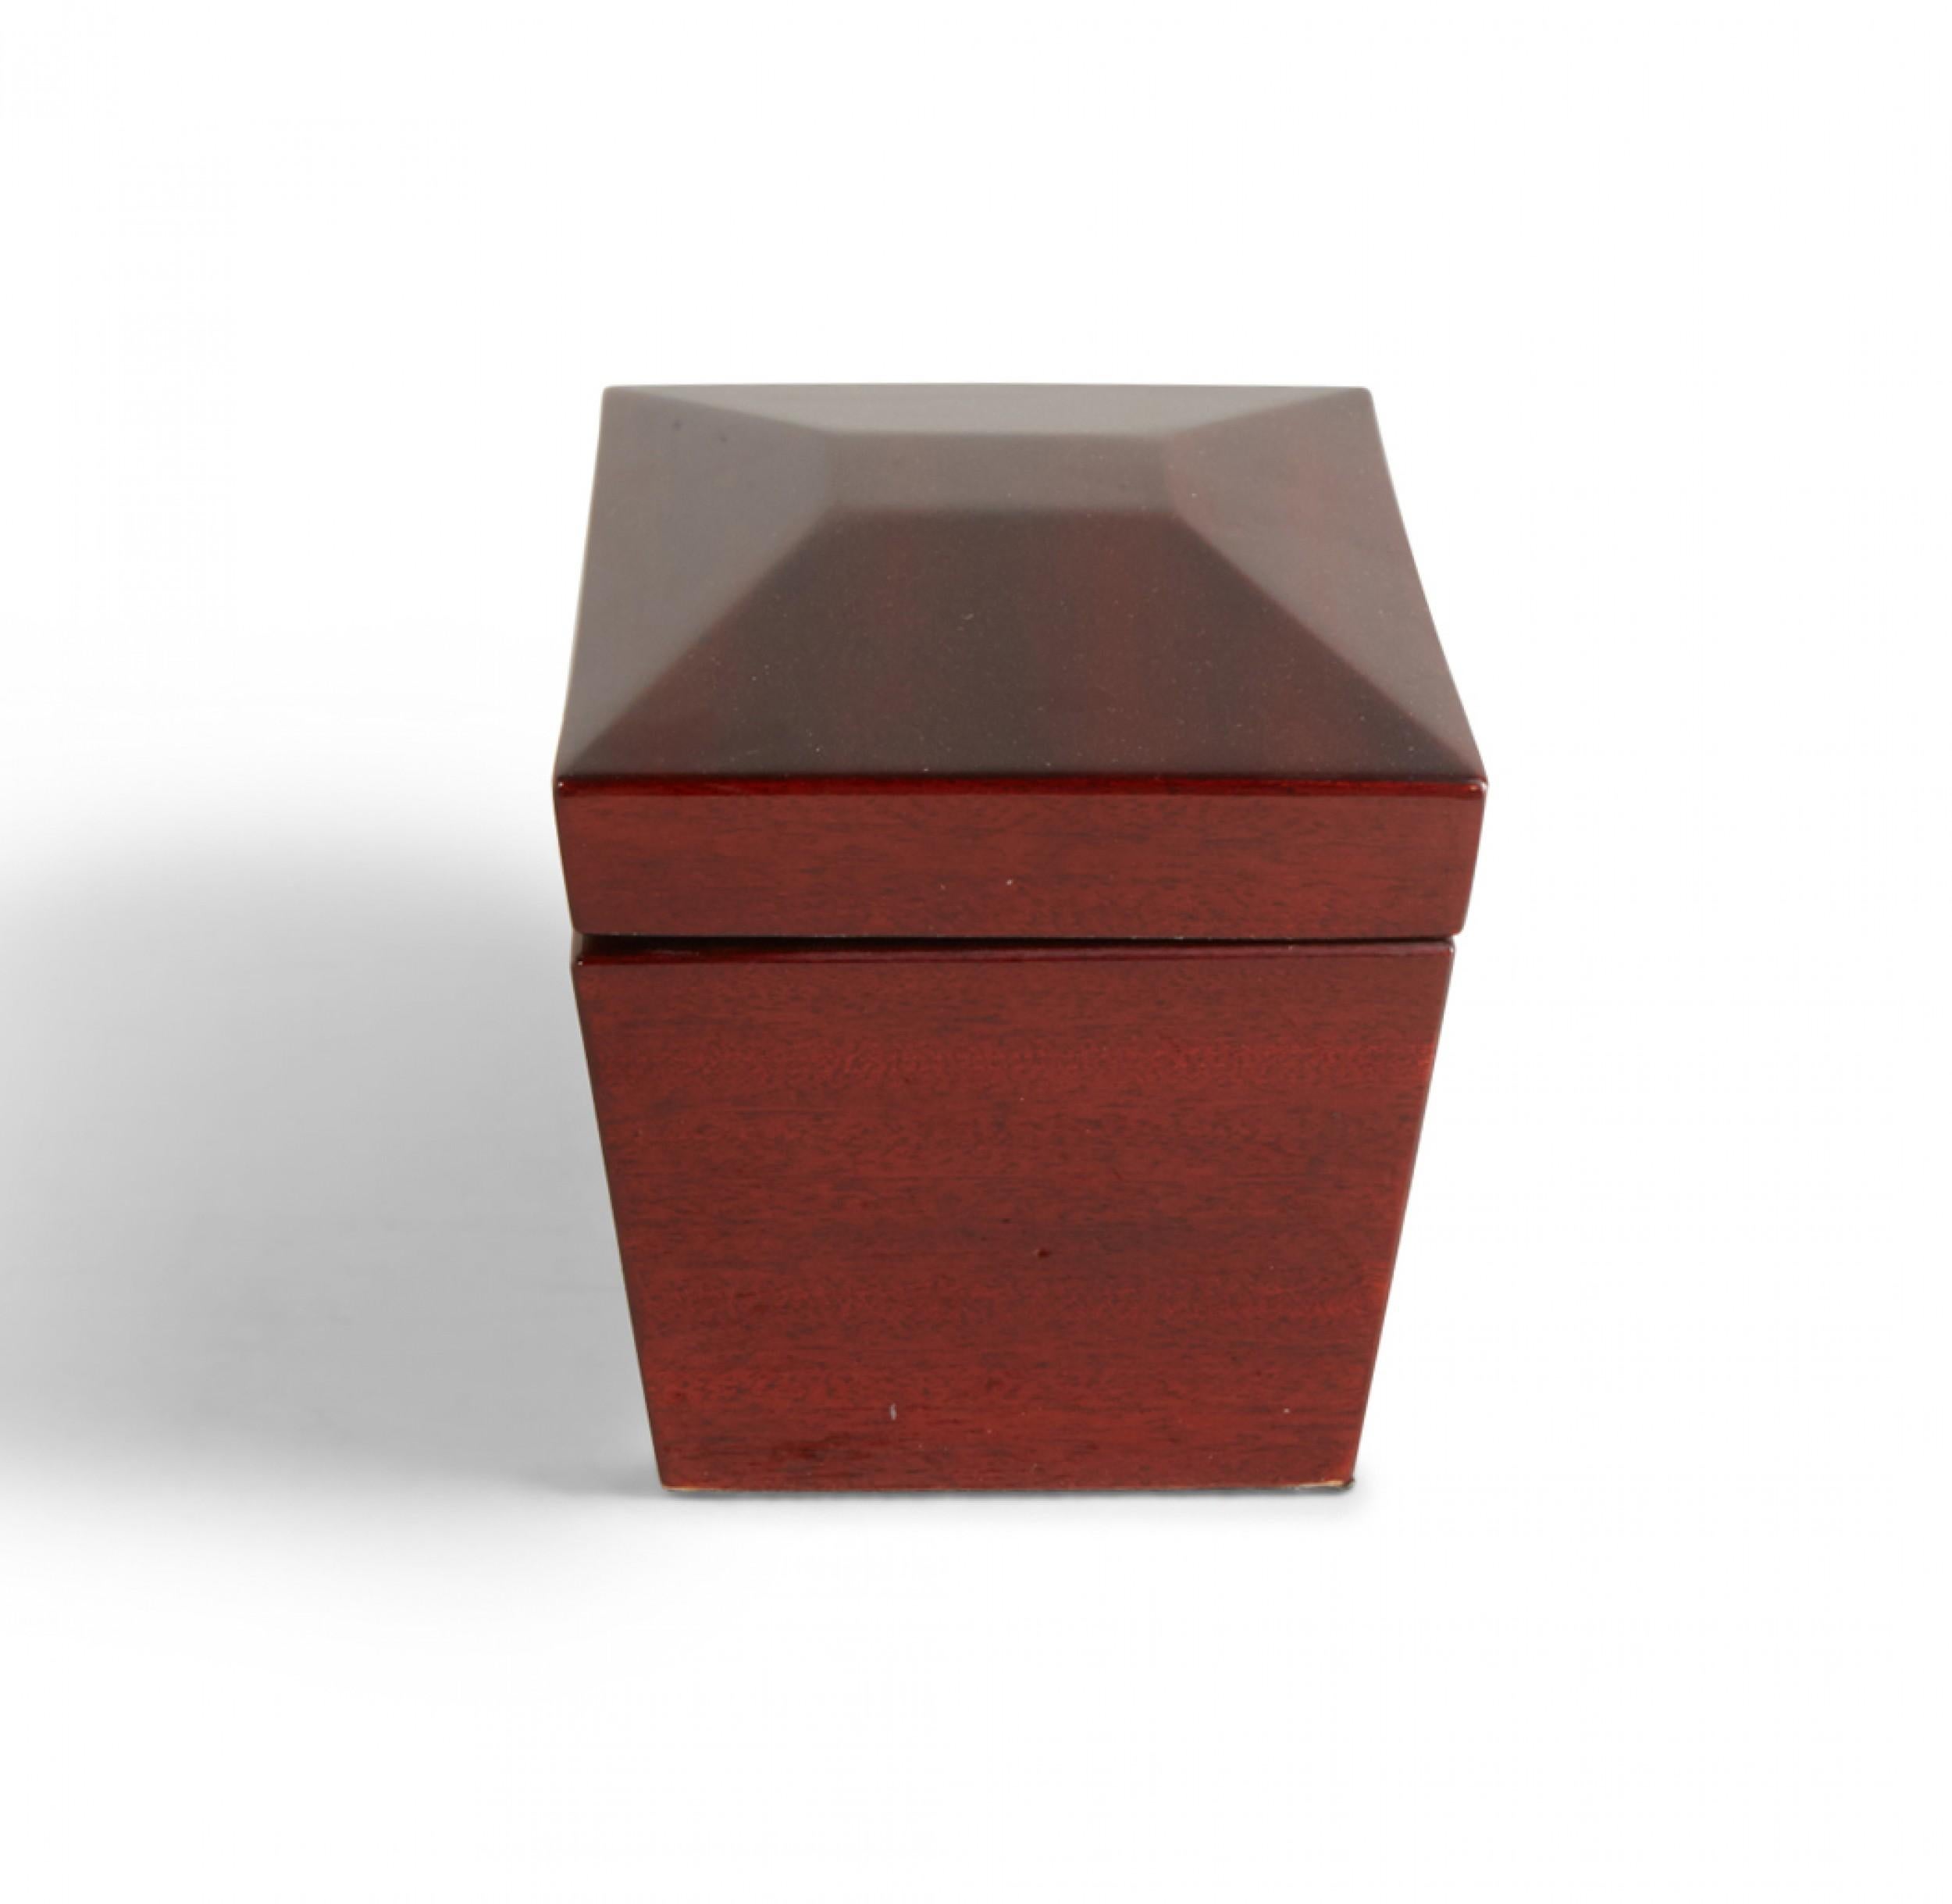 Contemporary decorative lacquered cherry wood box with a rectangular profile with faceted lid and tapered sides, and a brass-hinged lid that opens to reveal two interior compartments covered with black painted wooden square lids with turned knobs.